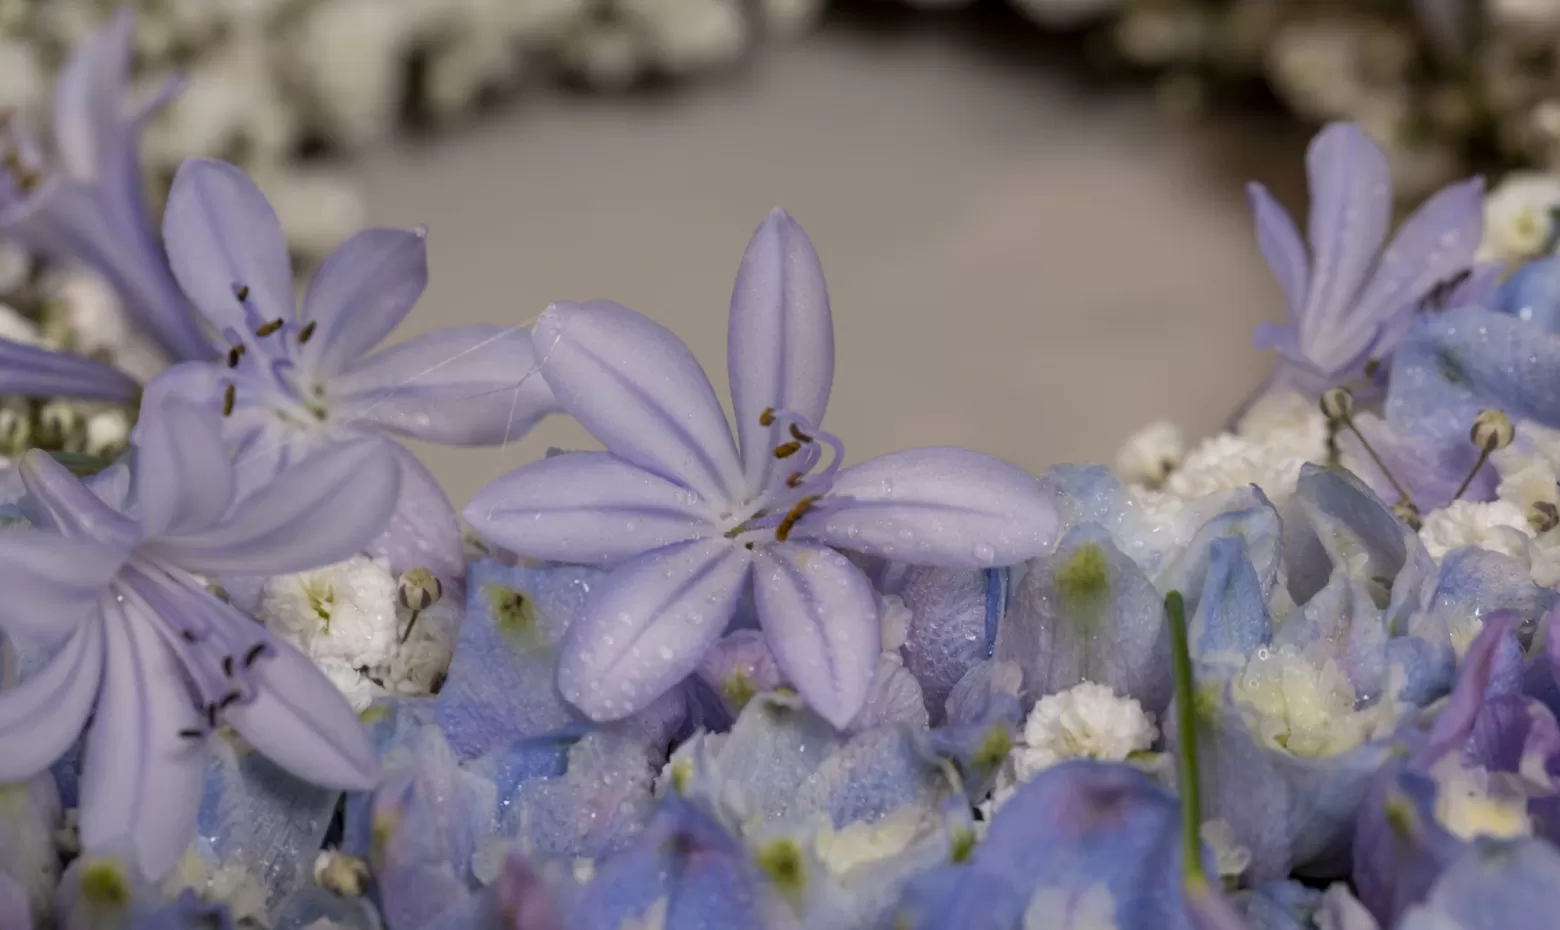 Funeral wreath with Delphinium, Agapanthus and Gypsophila